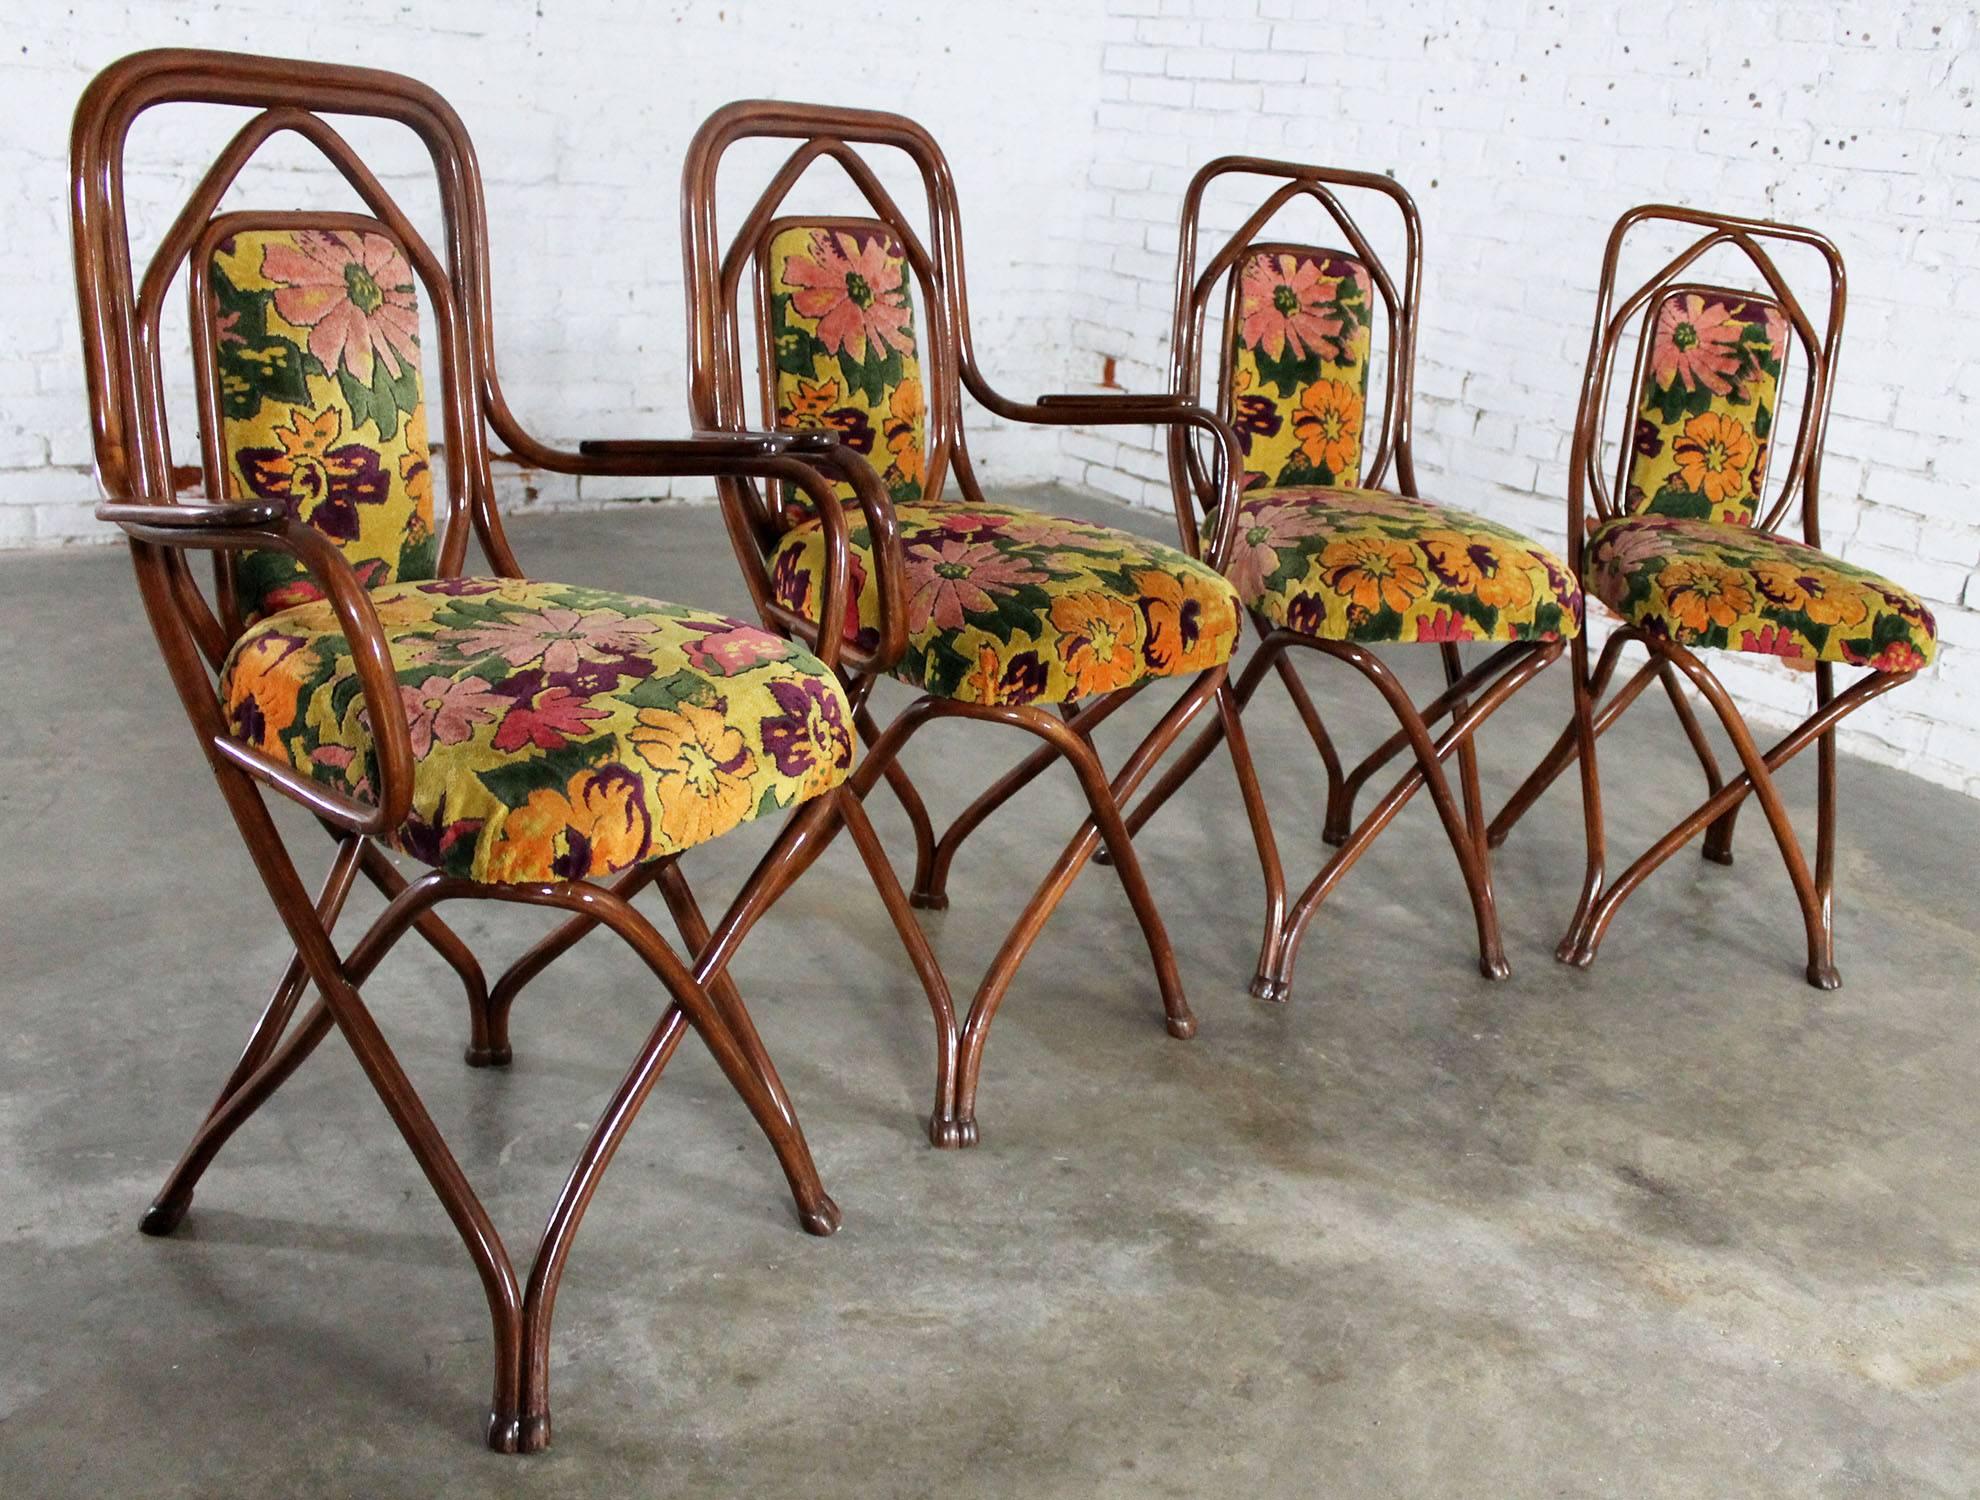 Incredible set of four circa 1850s Gebruder Thonet Bentwood dining chairs. This set consists of two arm chairs and two side chairs. They are in excellent condition and retain their circa 1950s bold and bright upholstery which gives them a